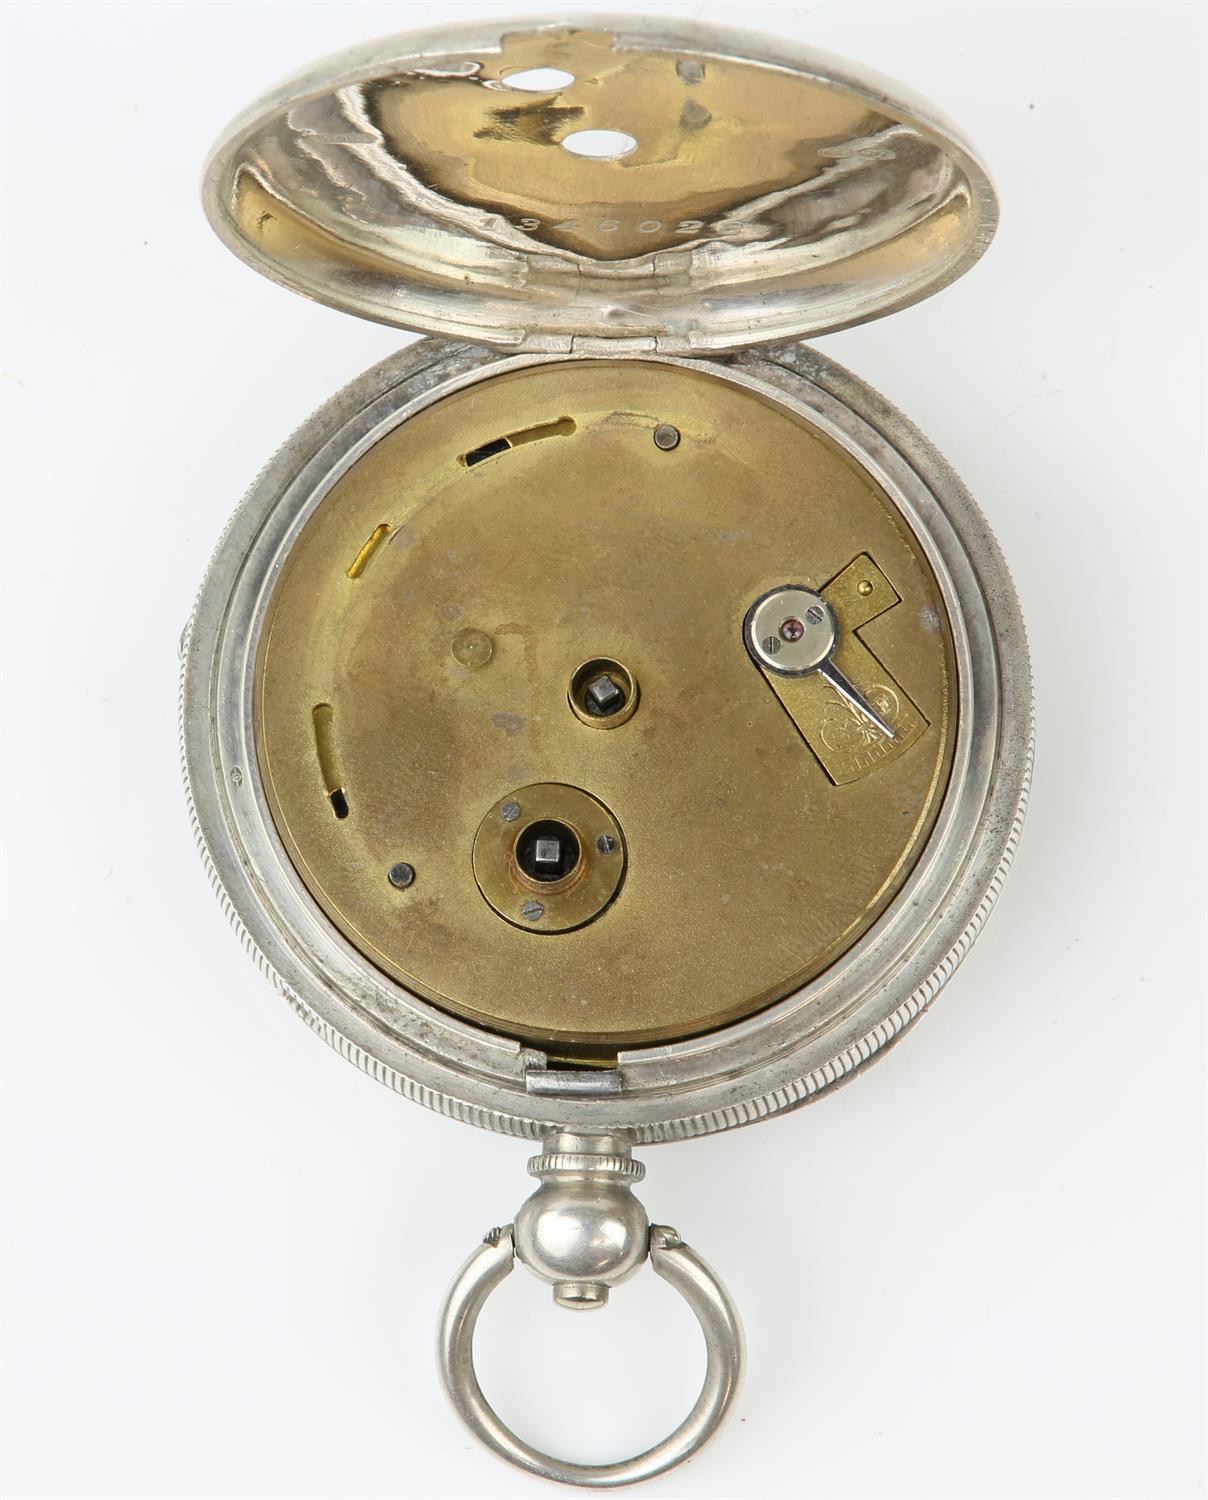 Two silver pocket watches, a Waltham full hunter pocket watch with signed white enamel dial, - Image 3 of 6